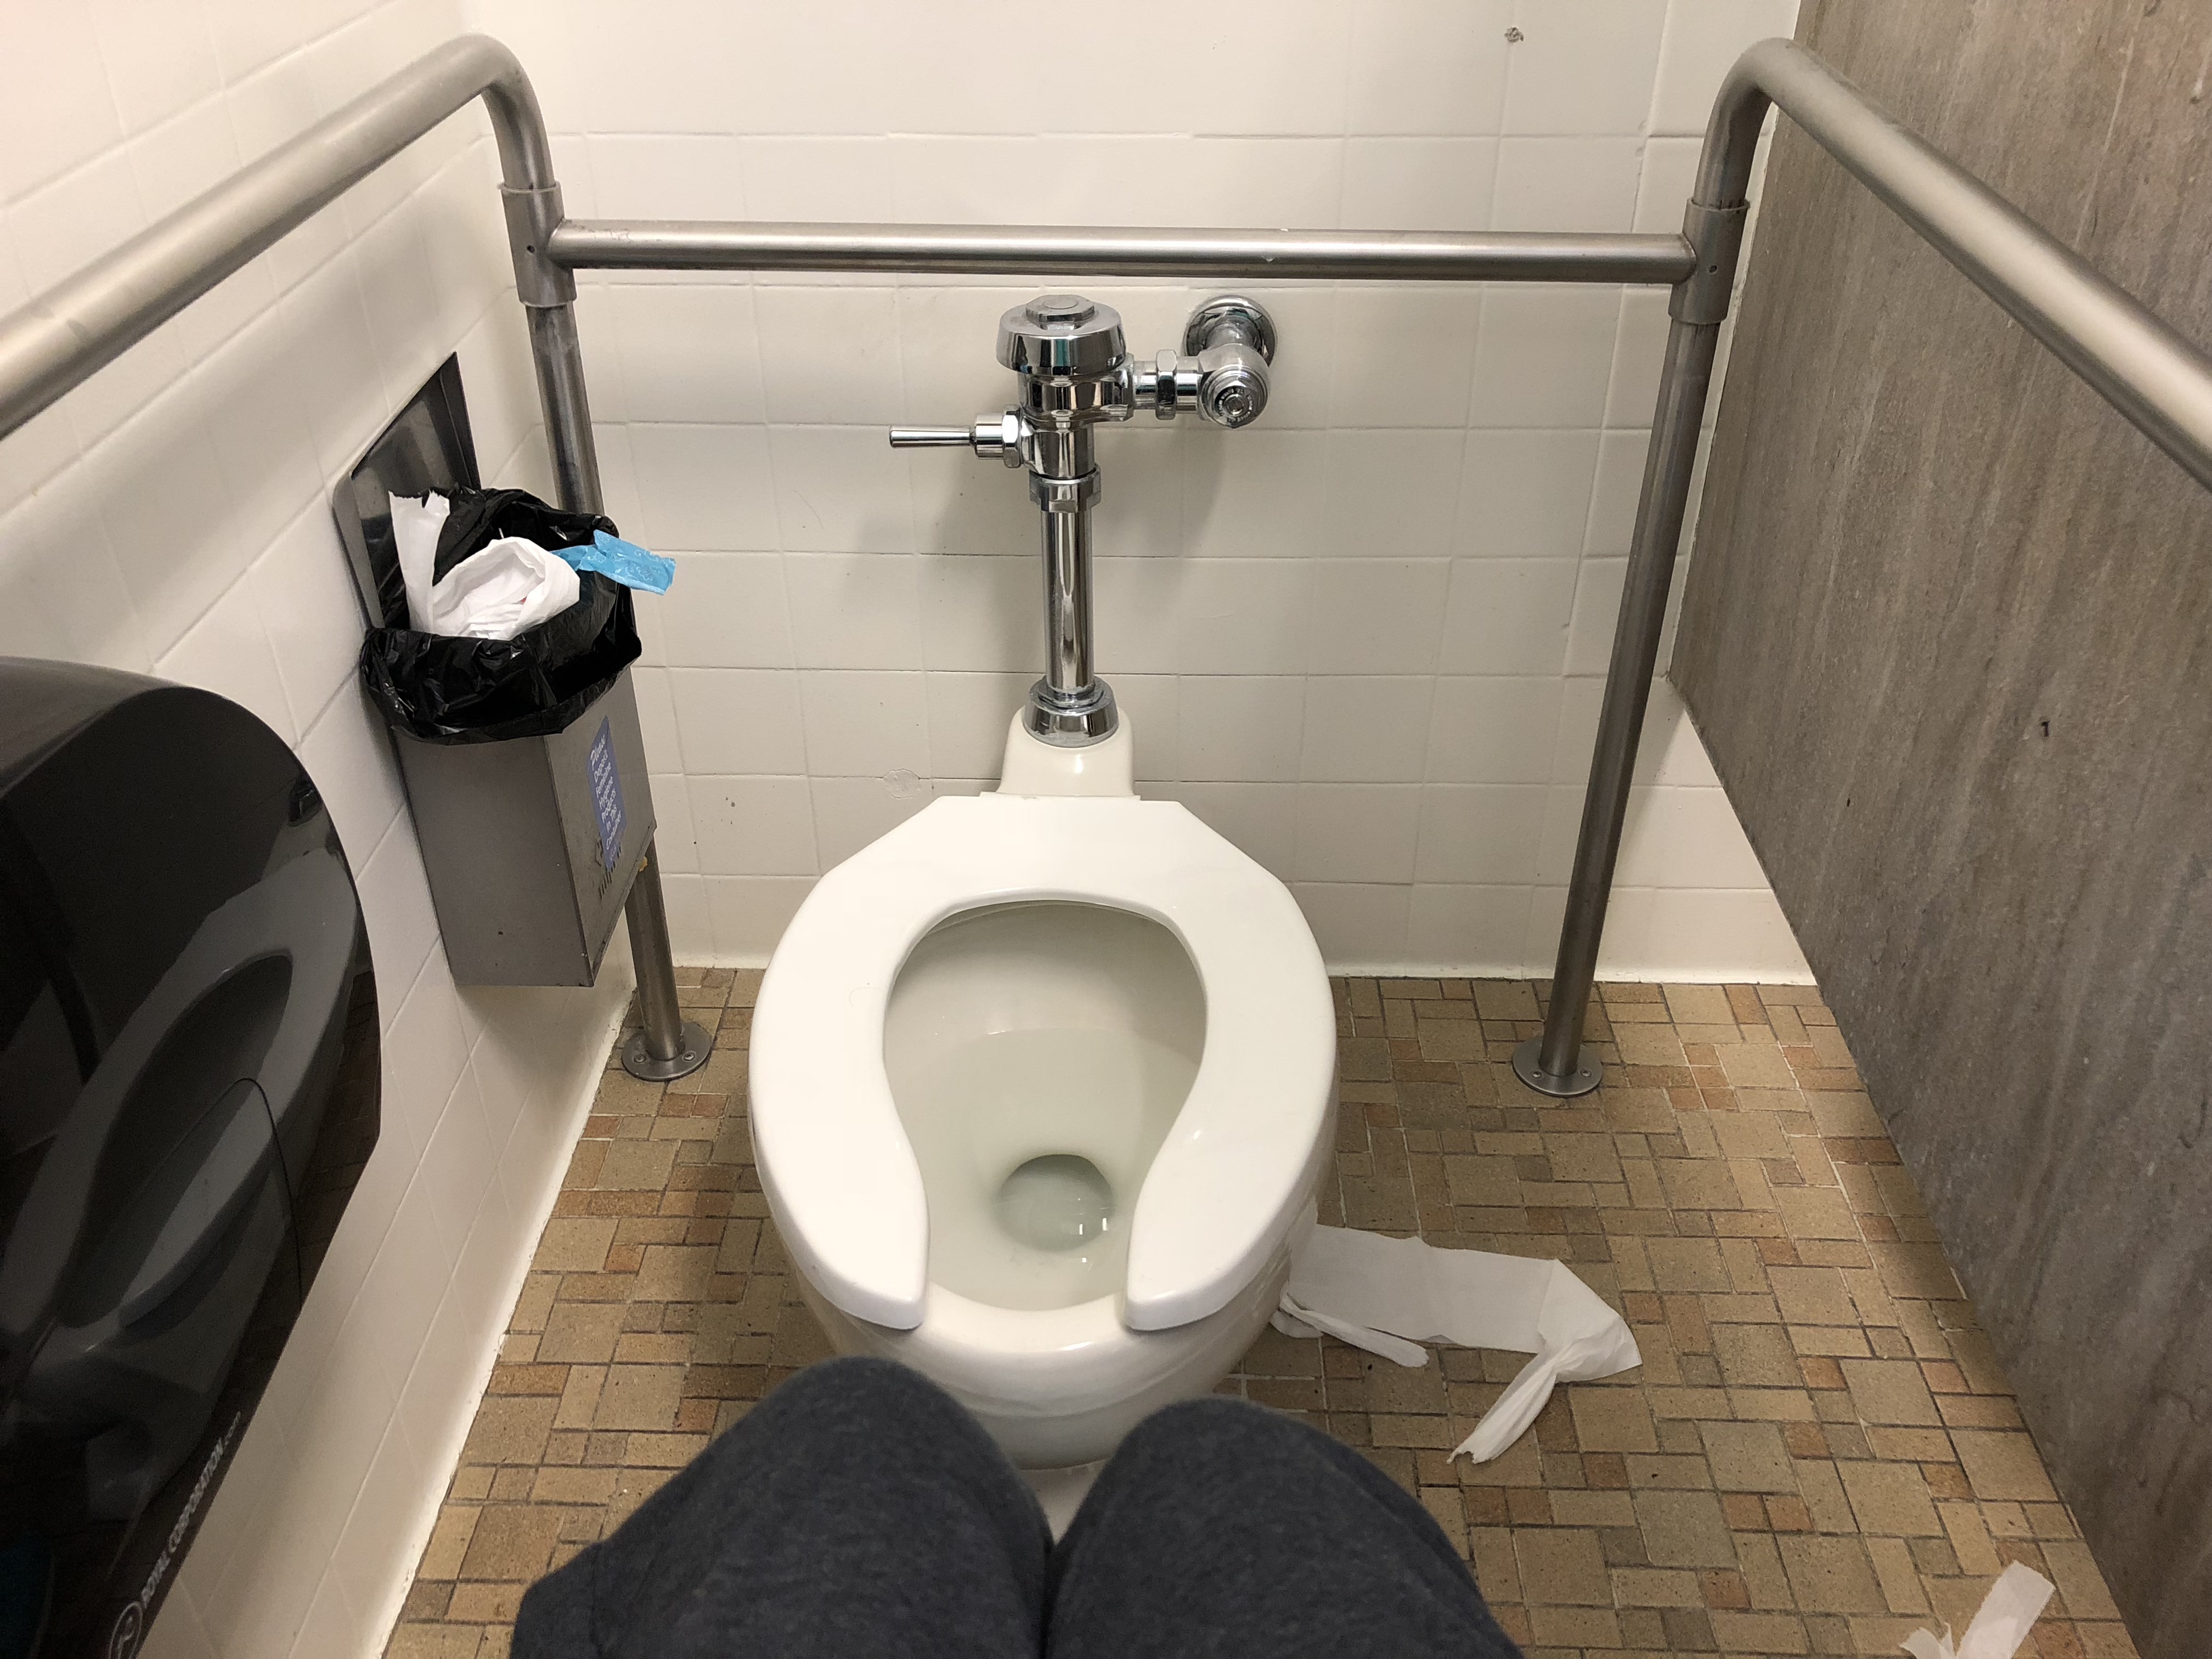 A person in a wheelchair showing how this mobility assisted stall is not large enough to properly accommodate a wheelchair.